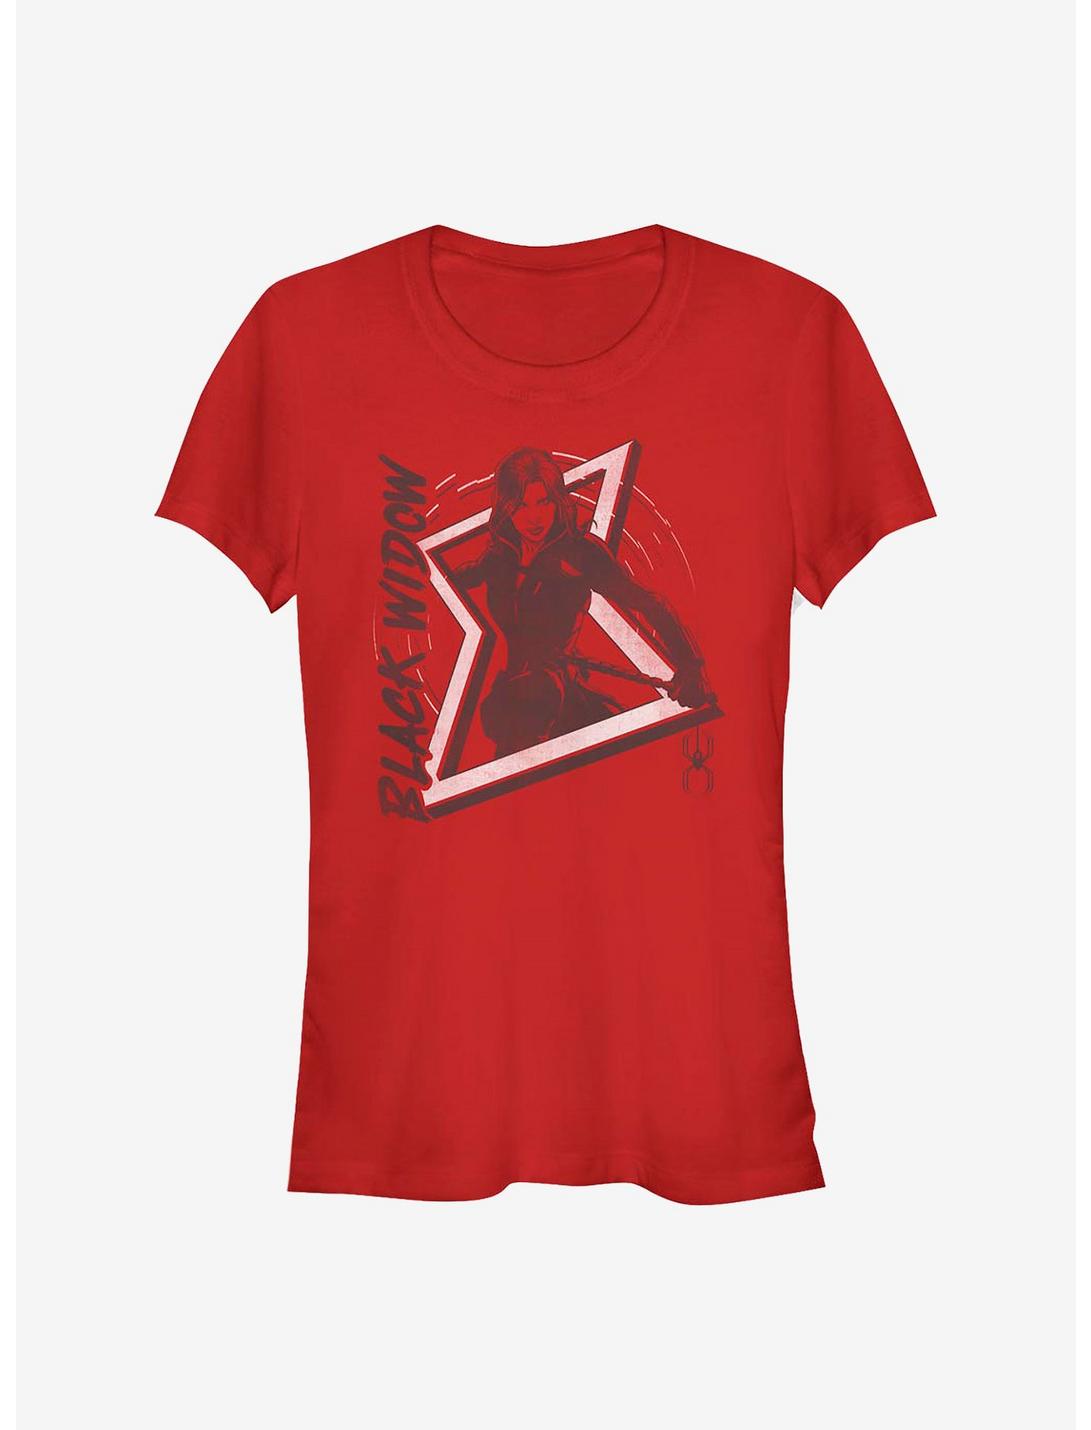 Marvel Black Widow Ready To Fight Girls T-Shirt, RED, hi-res